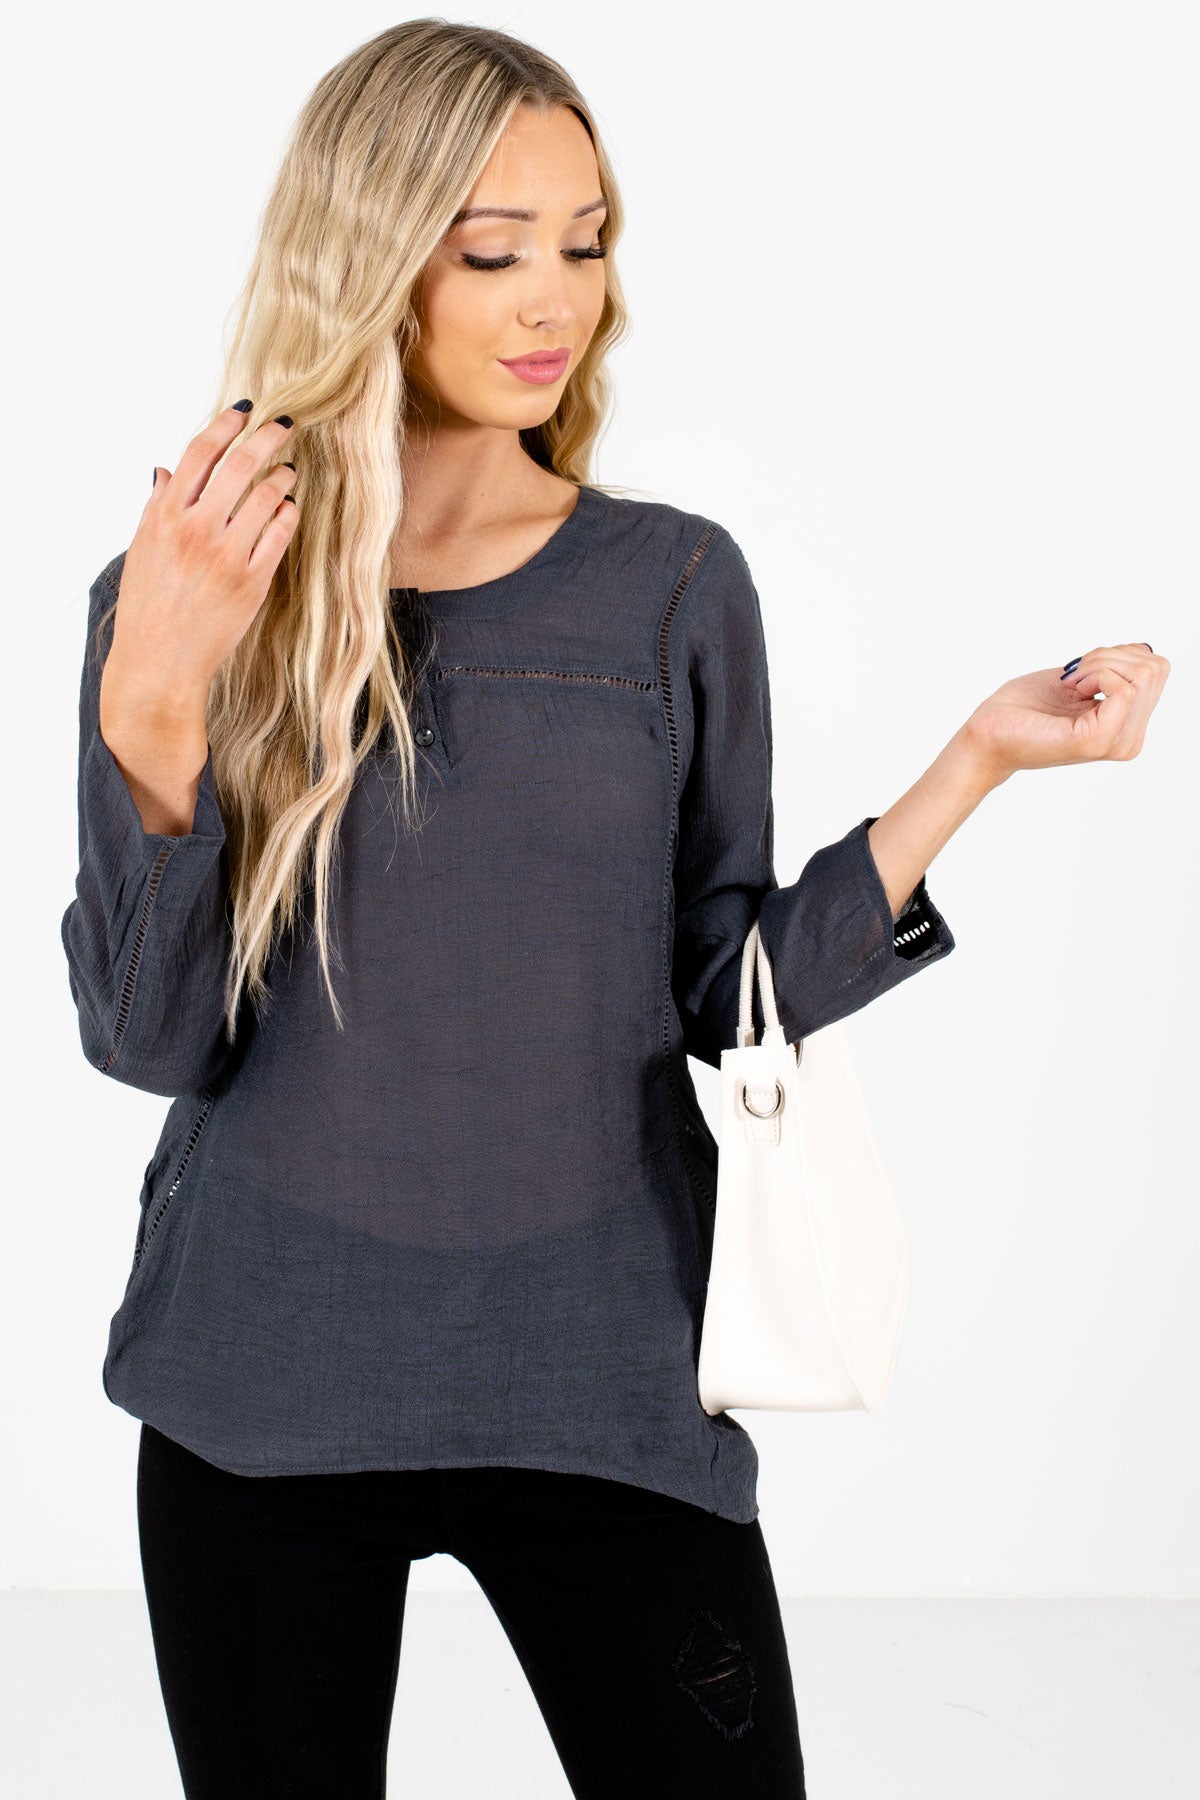 Women's Charcoal Gray High-Quality Lightweight Material Boutique Tops